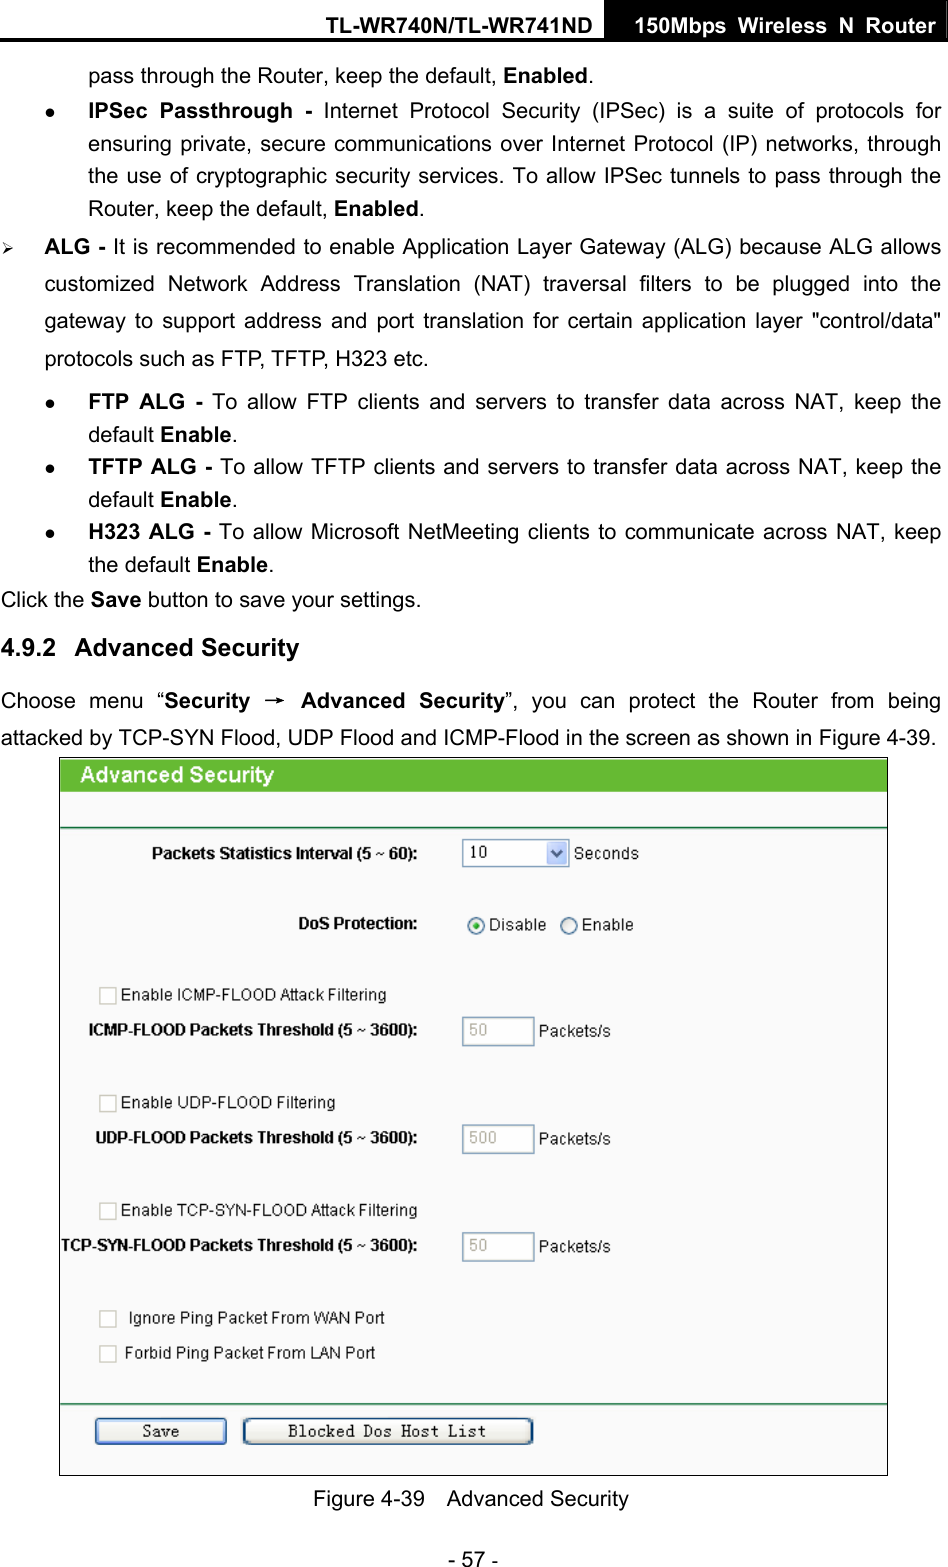 TL-WR740N/TL-WR741ND 150Mbps Wireless N Router - 57 - pass through the Router, keep the default, Enabled. z IPSec Passthrough - Internet Protocol Security (IPSec) is a suite of protocols for ensuring private, secure communications over Internet Protocol (IP) networks, through the use of cryptographic security services. To allow IPSec tunnels to pass through the Router, keep the default, Enabled. ¾ ALG - It is recommended to enable Application Layer Gateway (ALG) because ALG allows customized Network Address Translation (NAT) traversal filters to be plugged into the gateway to support address and port translation for certain application layer &quot;control/data&quot; protocols such as FTP, TFTP, H323 etc.   z FTP ALG - To allow FTP clients and servers to transfer data across NAT, keep the default Enable.   z TFTP ALG - To allow TFTP clients and servers to transfer data across NAT, keep the default Enable. z H323 ALG - To allow Microsoft NetMeeting clients to communicate across NAT, keep the default Enable. Click the Save button to save your settings. 4.9.2  Advanced Security Choose menu “Security  → Advanced Security”, you can protect the Router from being attacked by TCP-SYN Flood, UDP Flood and ICMP-Flood in the screen as shown in Figure 4-39.   Figure 4-39  Advanced Security 